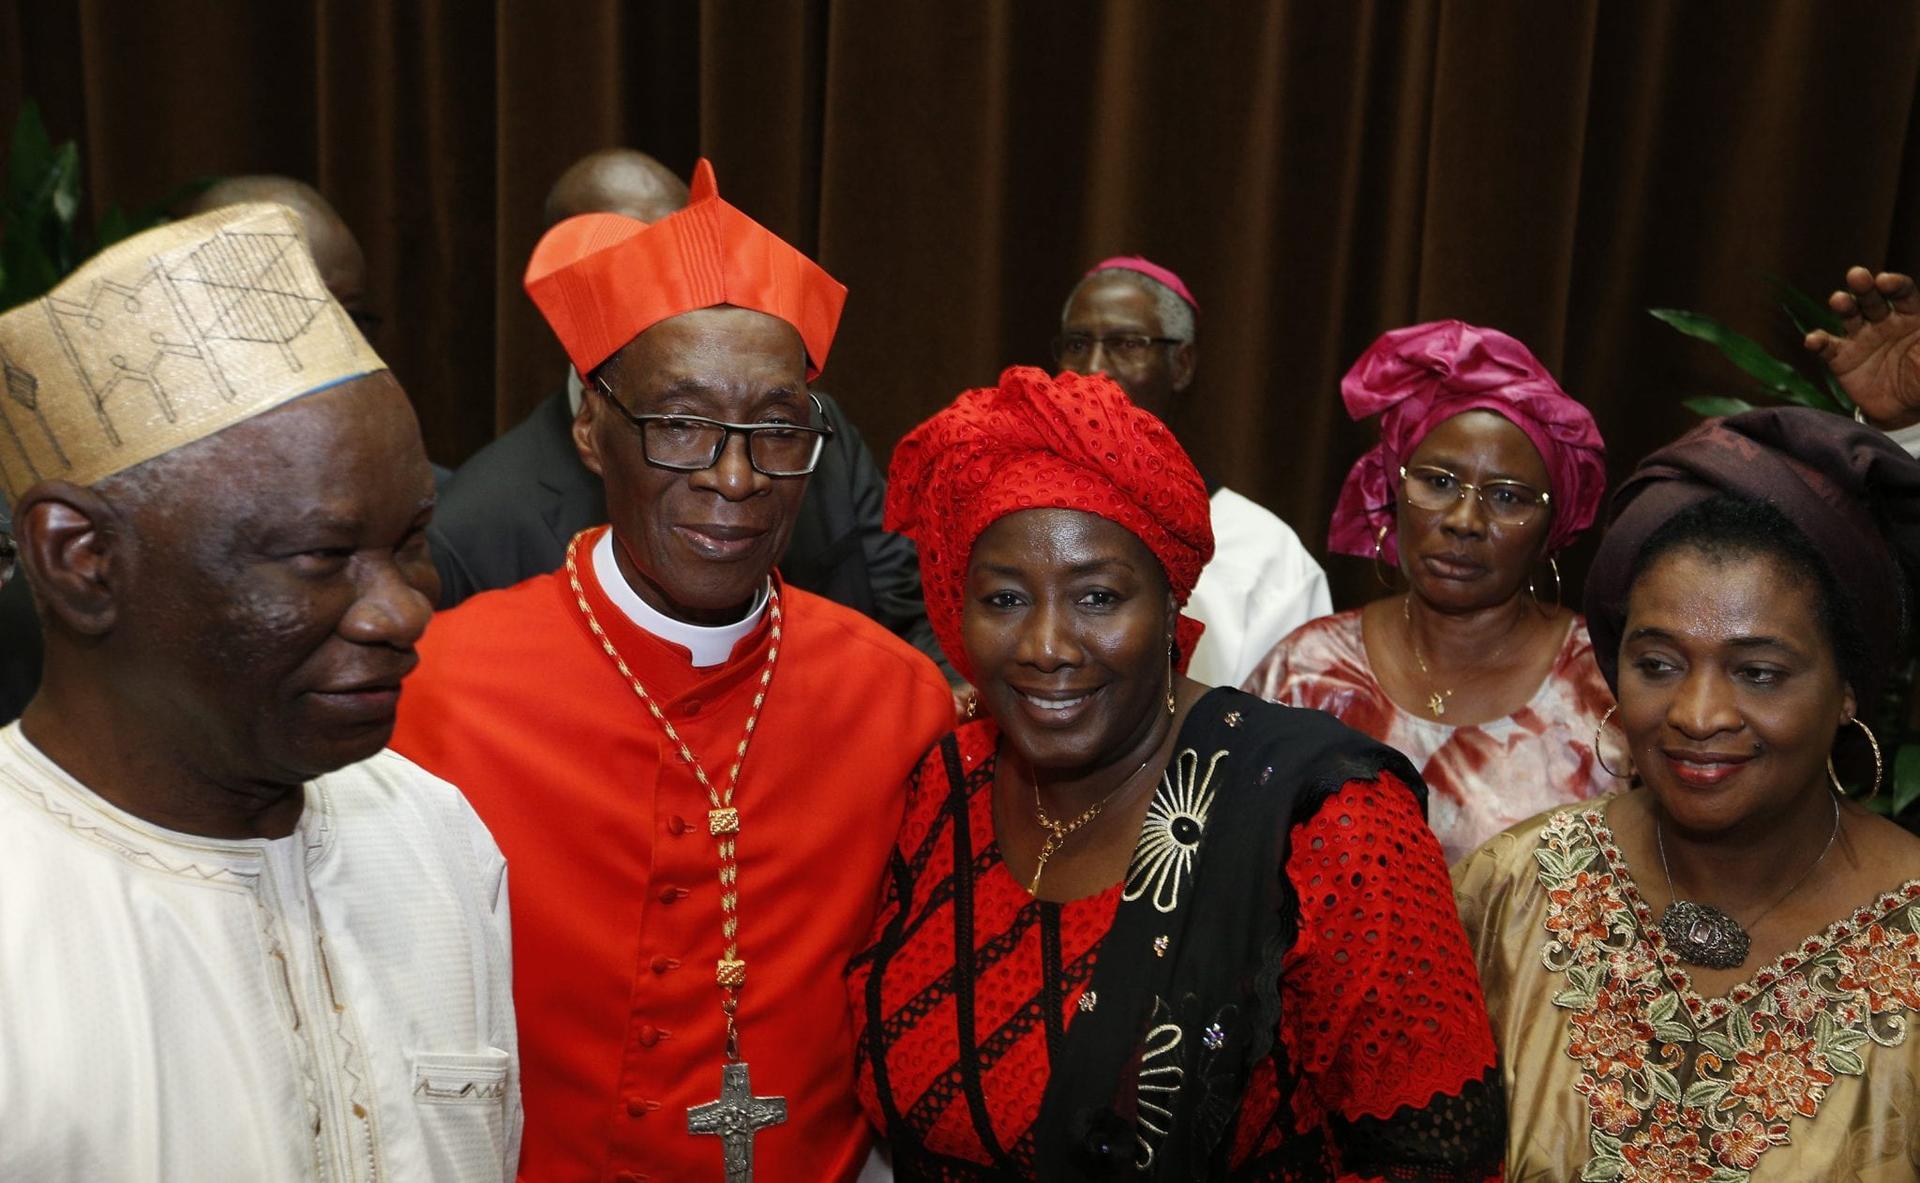 Fresh from consistory, new cardinals greet family, friends